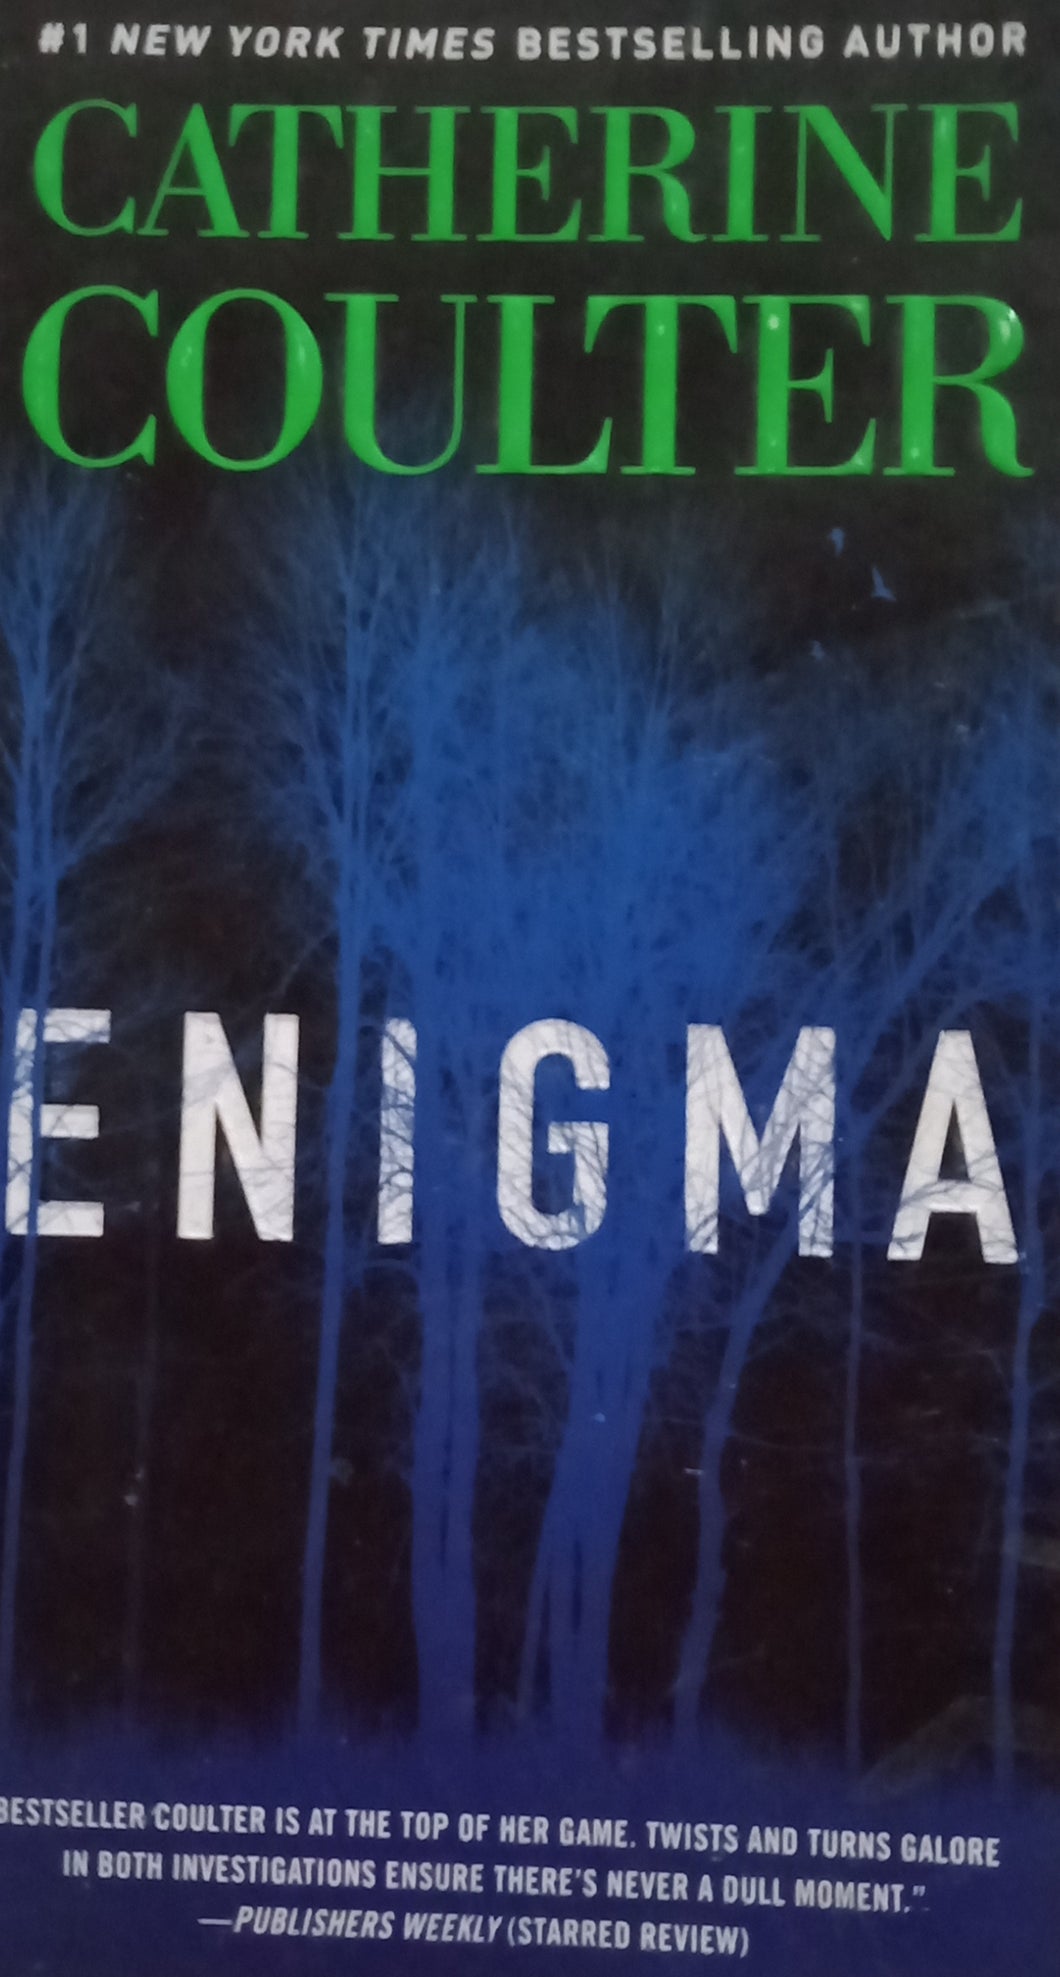 Enigma by Catherine Coulter